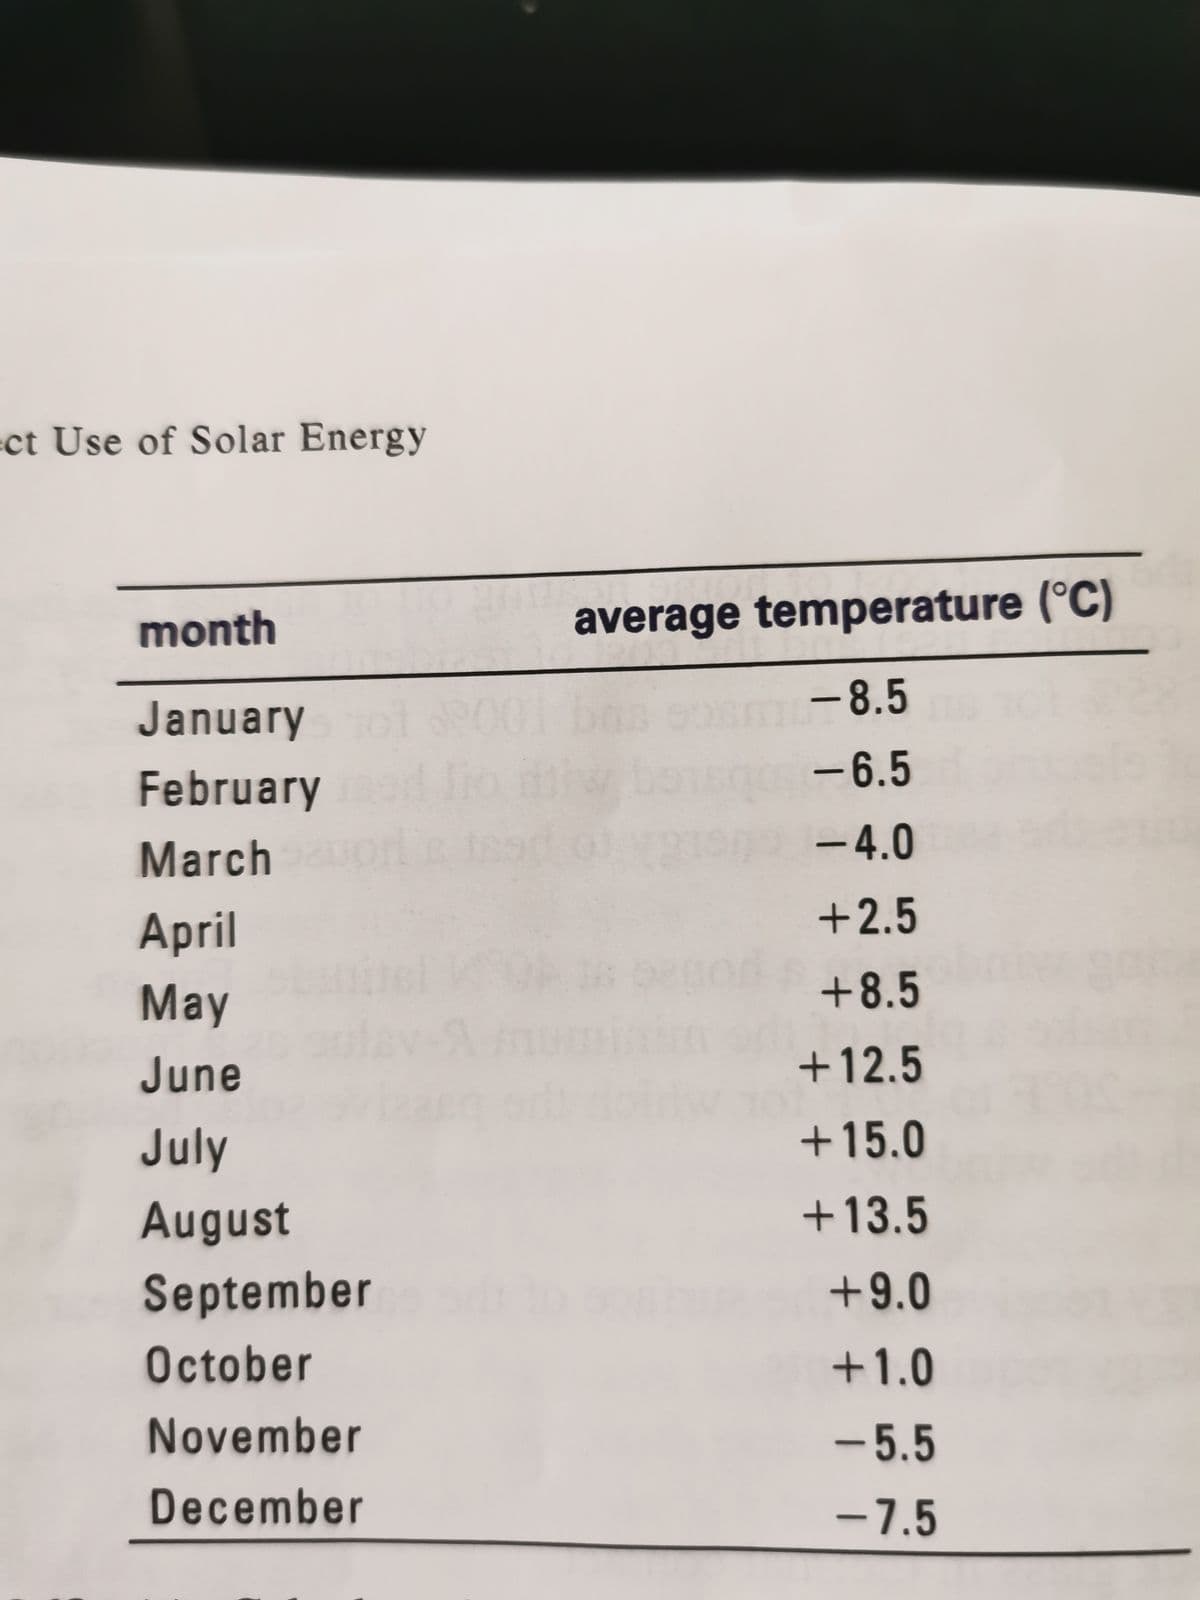 ct Use of Solar Energy
month
average temperature (°C)
-8.5
January
90011
-6.5
February
March
-4.0
April
+2.5
May
+8.5
June
+12.5
July
+15.0
August
+13.5
September
+9.0
October
+1.0
November
-5.5
December
-7.5
